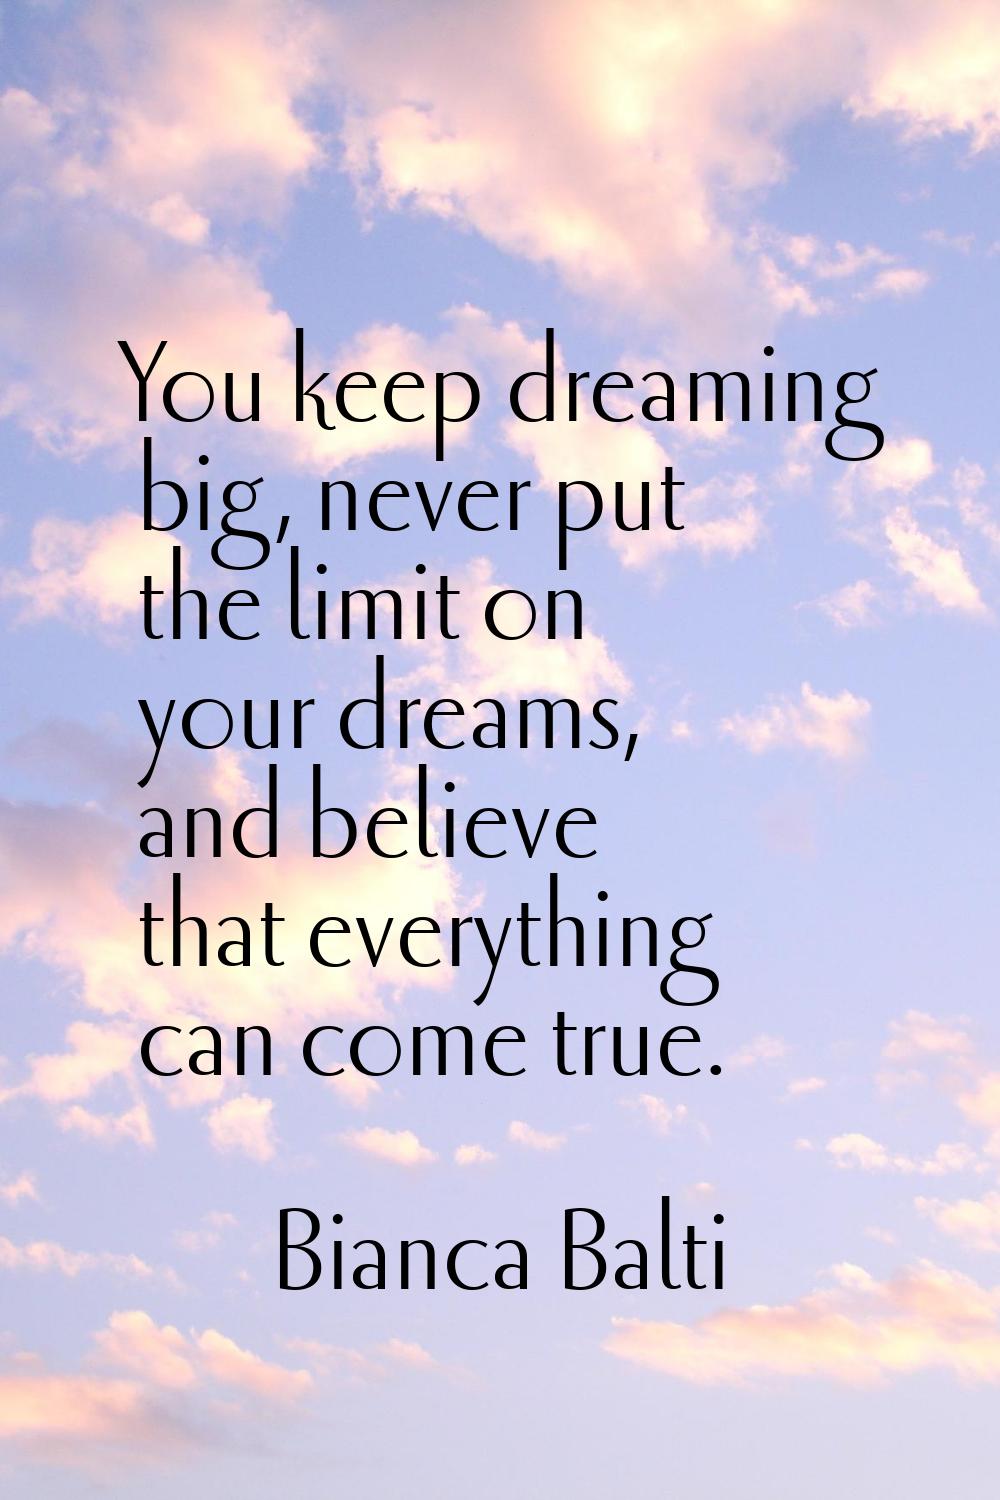 You keep dreaming big, never put the limit on your dreams, and believe that everything can come tru